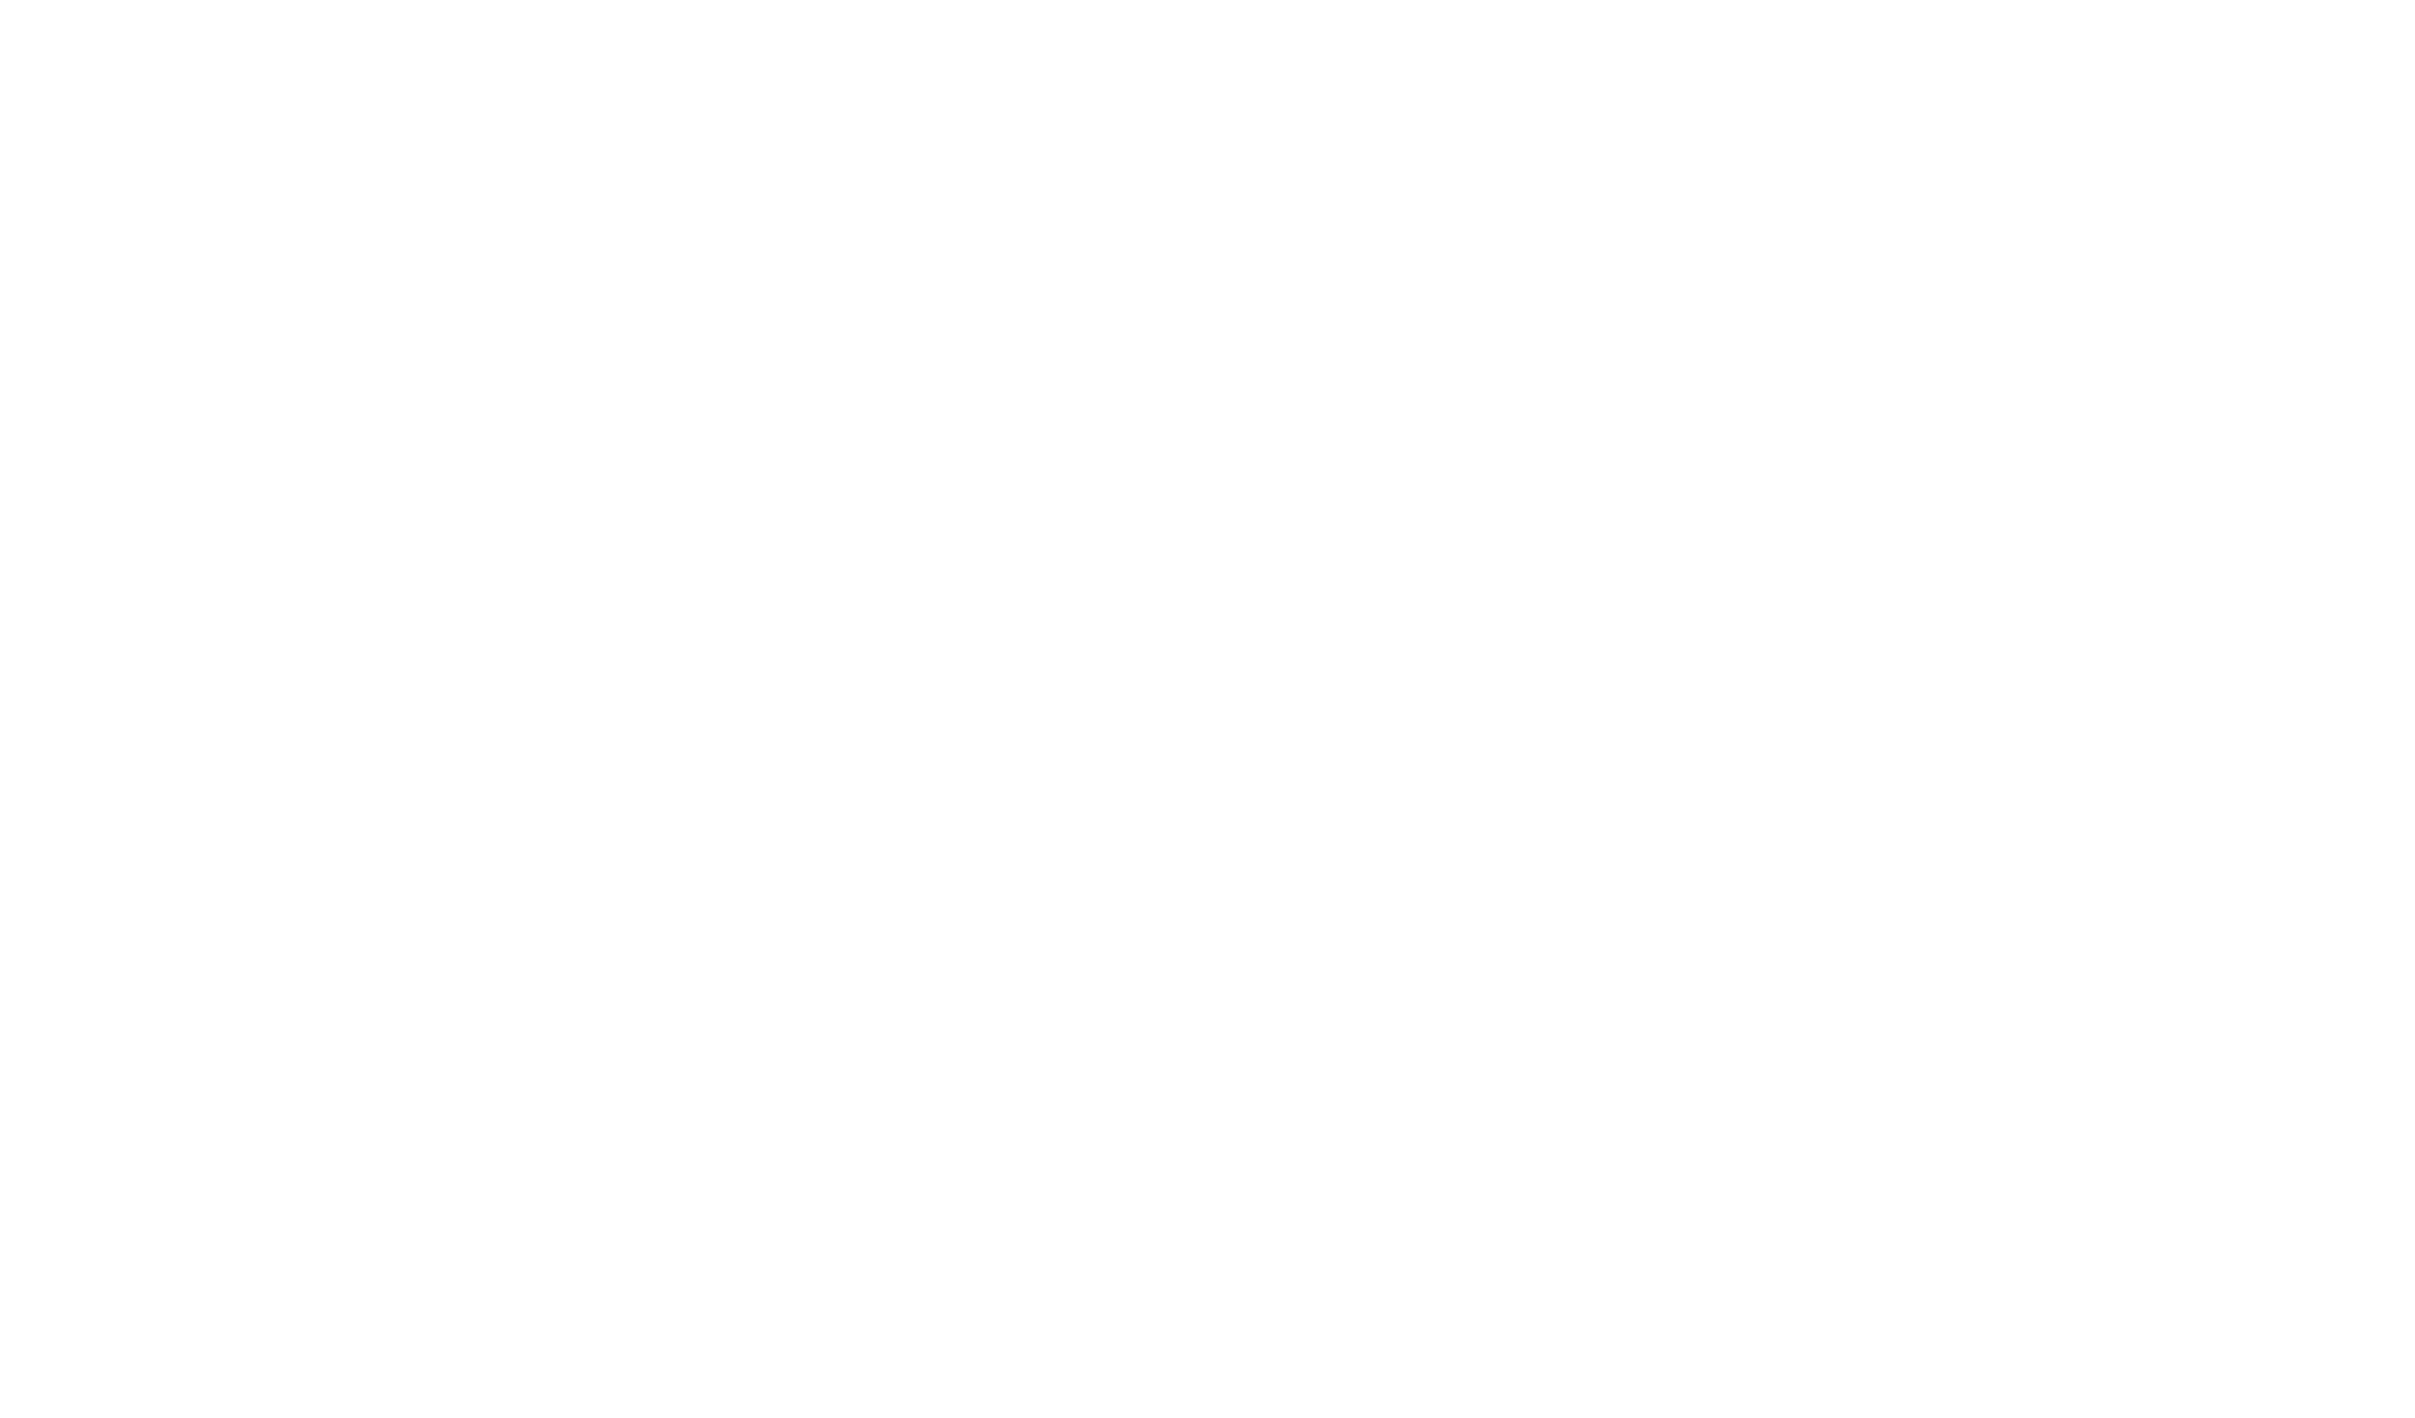 Hinckley and Rugby Building Society